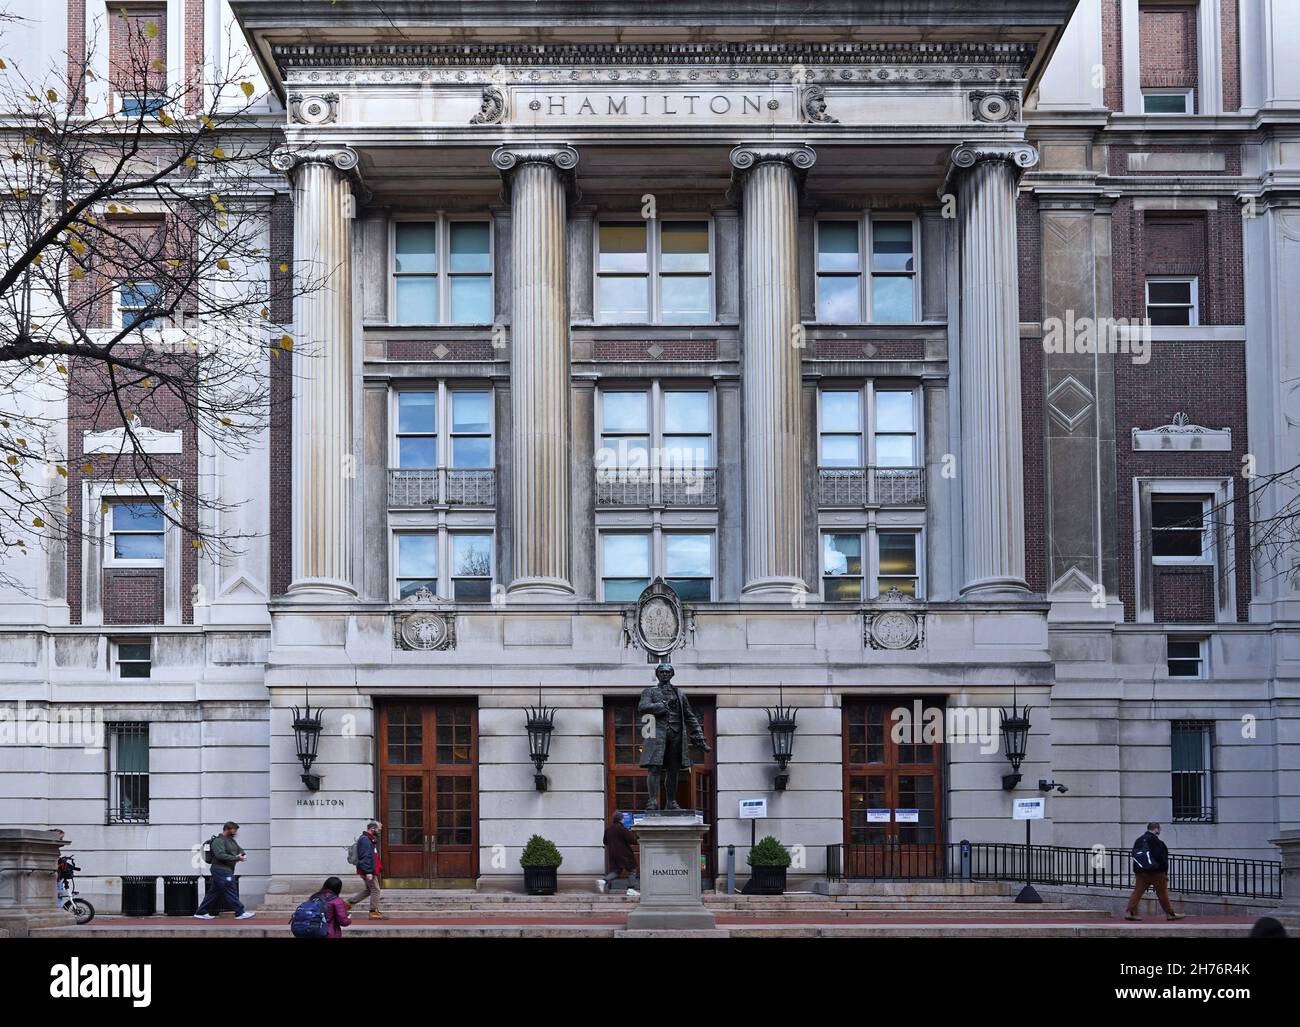 New York City, USA - November 15, 2021: Classical style building named after Alexander Hamilton on the campus of Columbia University Stock Photo